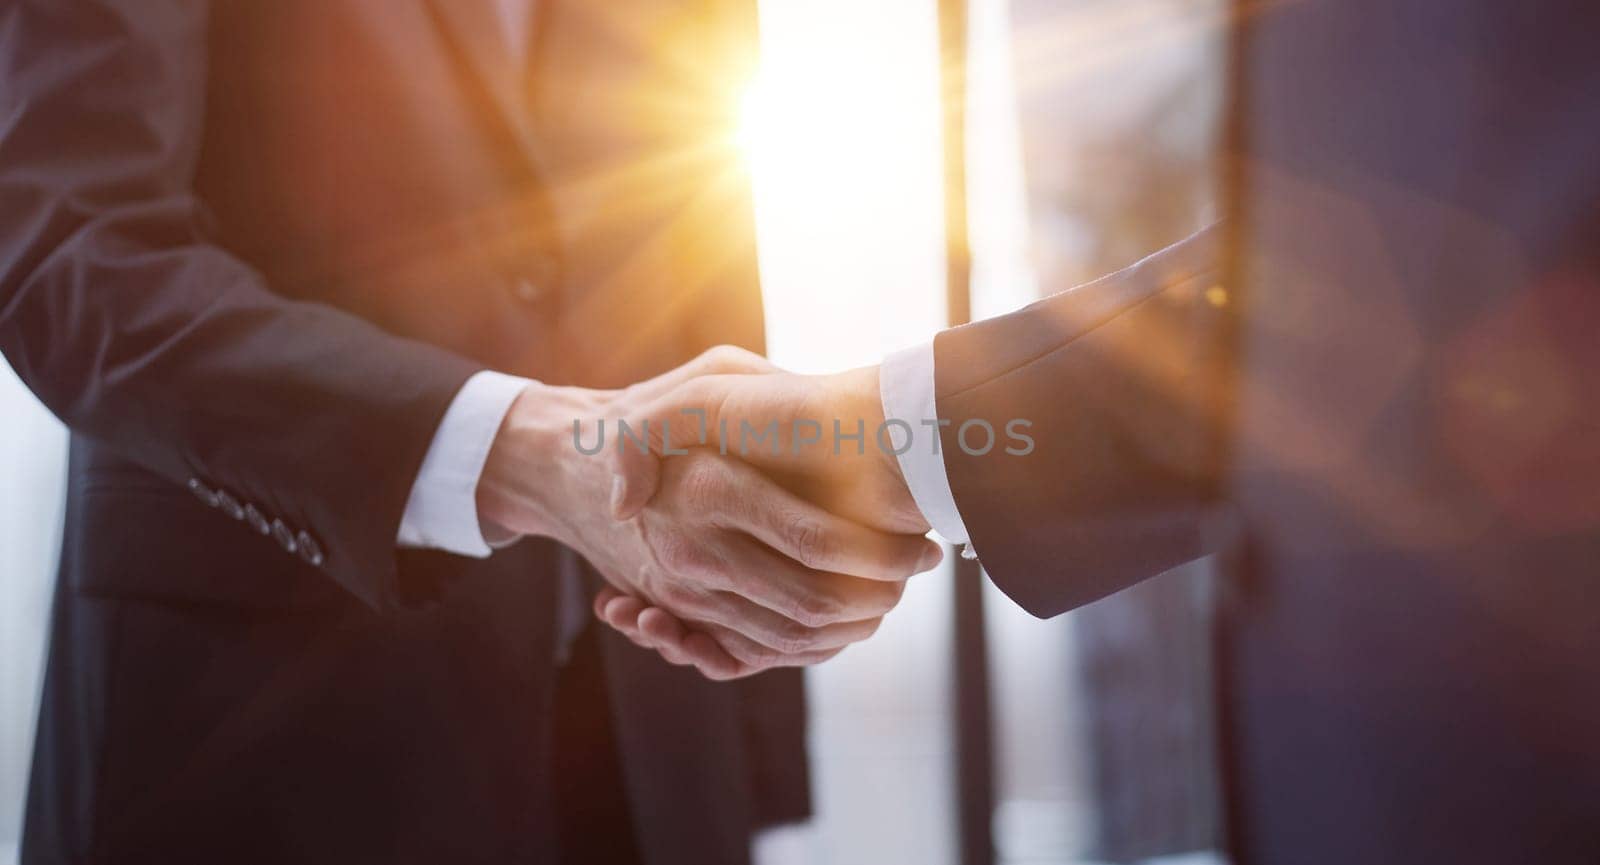 businessmen meeting and handshake in front of business center buildings by Prosto